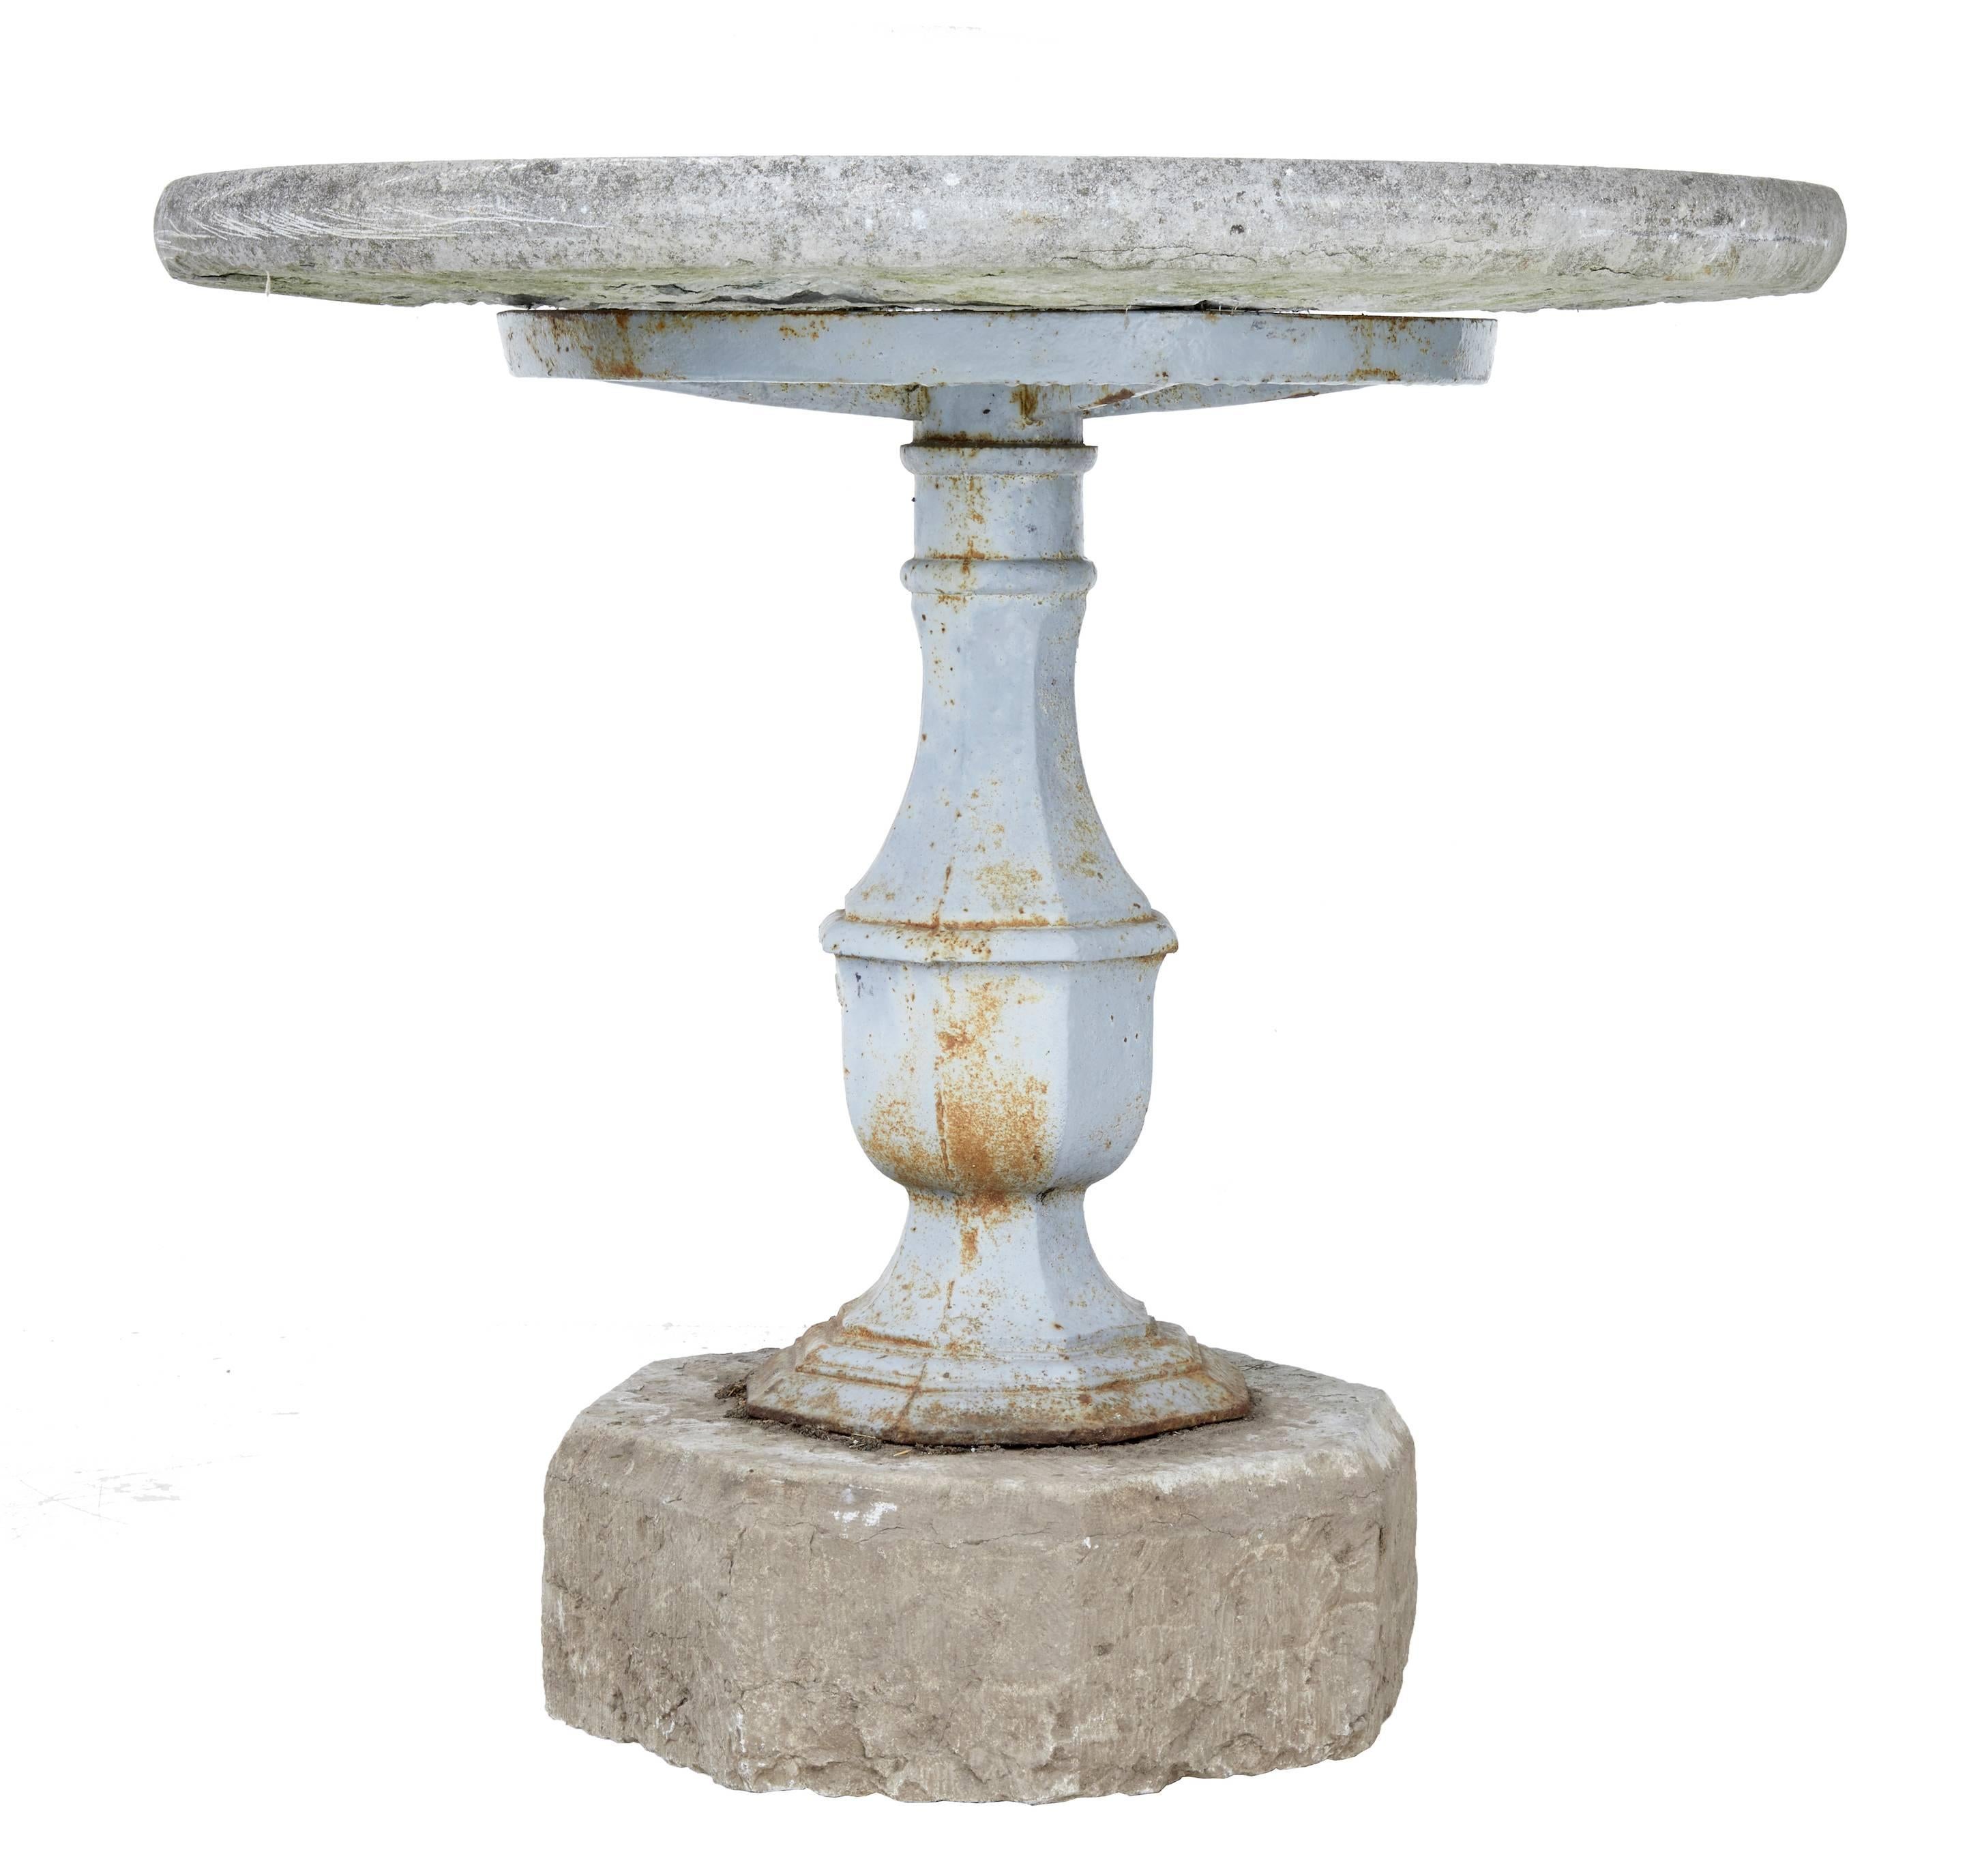 We are pleased to present a rare stone and iron garden table from the park at Taxinge castle outside Södertälje. Made at Stavsjö Bruk between Nyköping and Norrköping.
The manufacture of cannons at the Stavsjo Bruk is well known and that is where